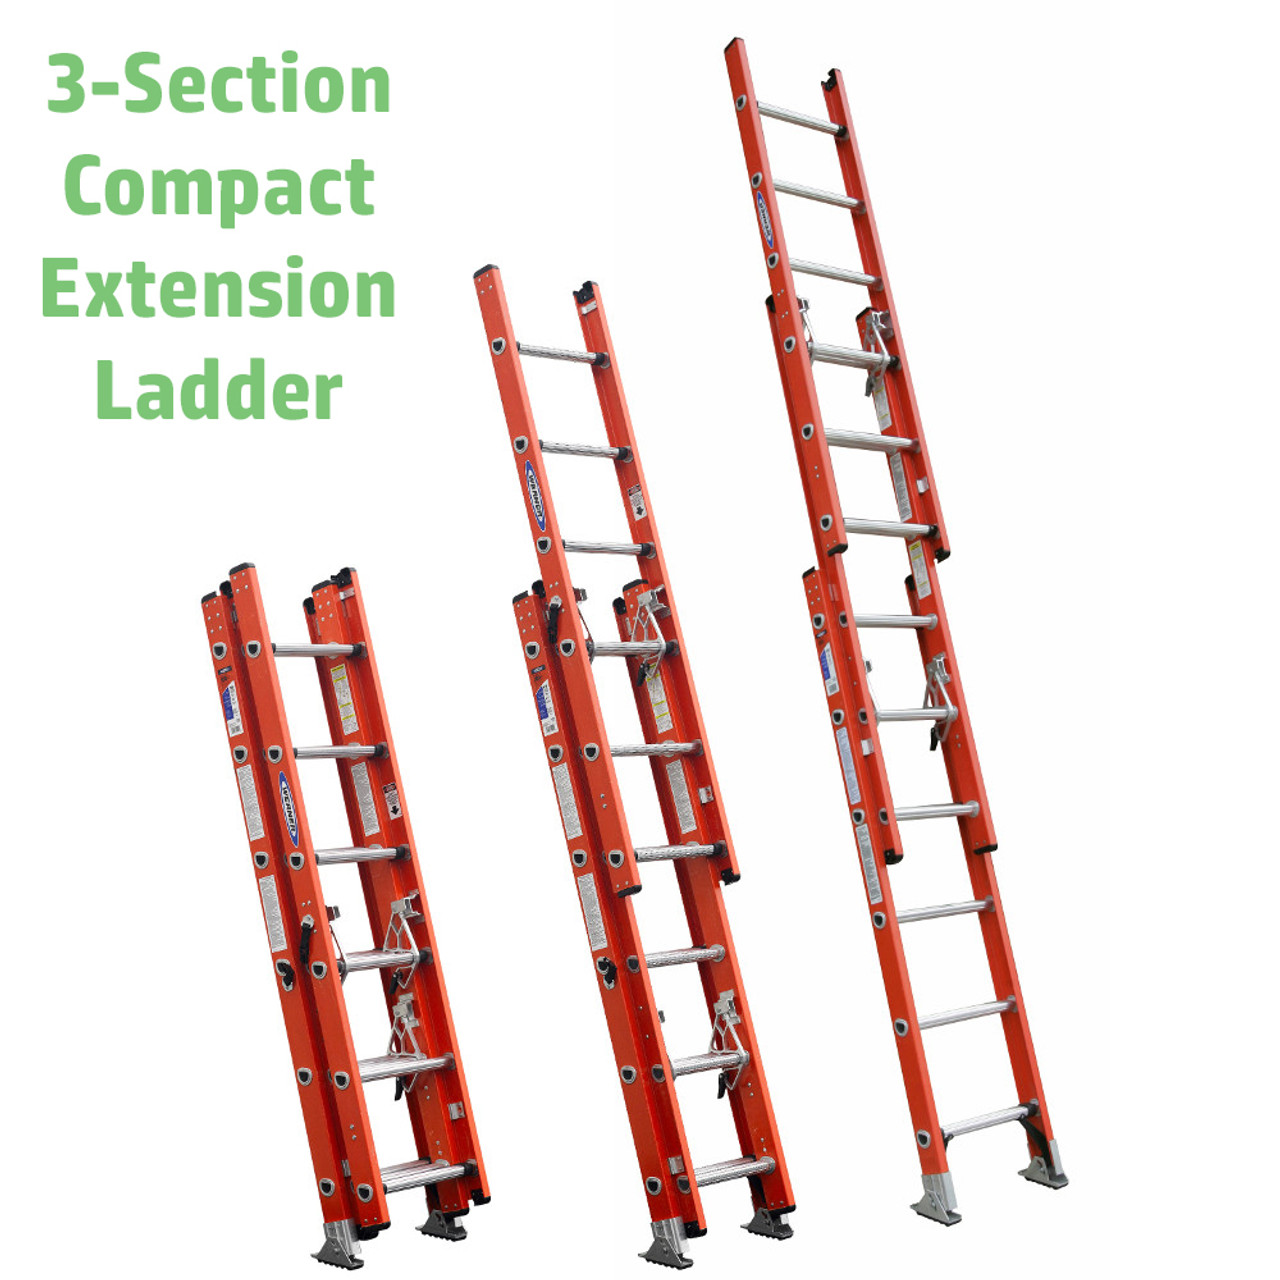 Master Lock LadderLock helps secure ladders and cargo - Electrical